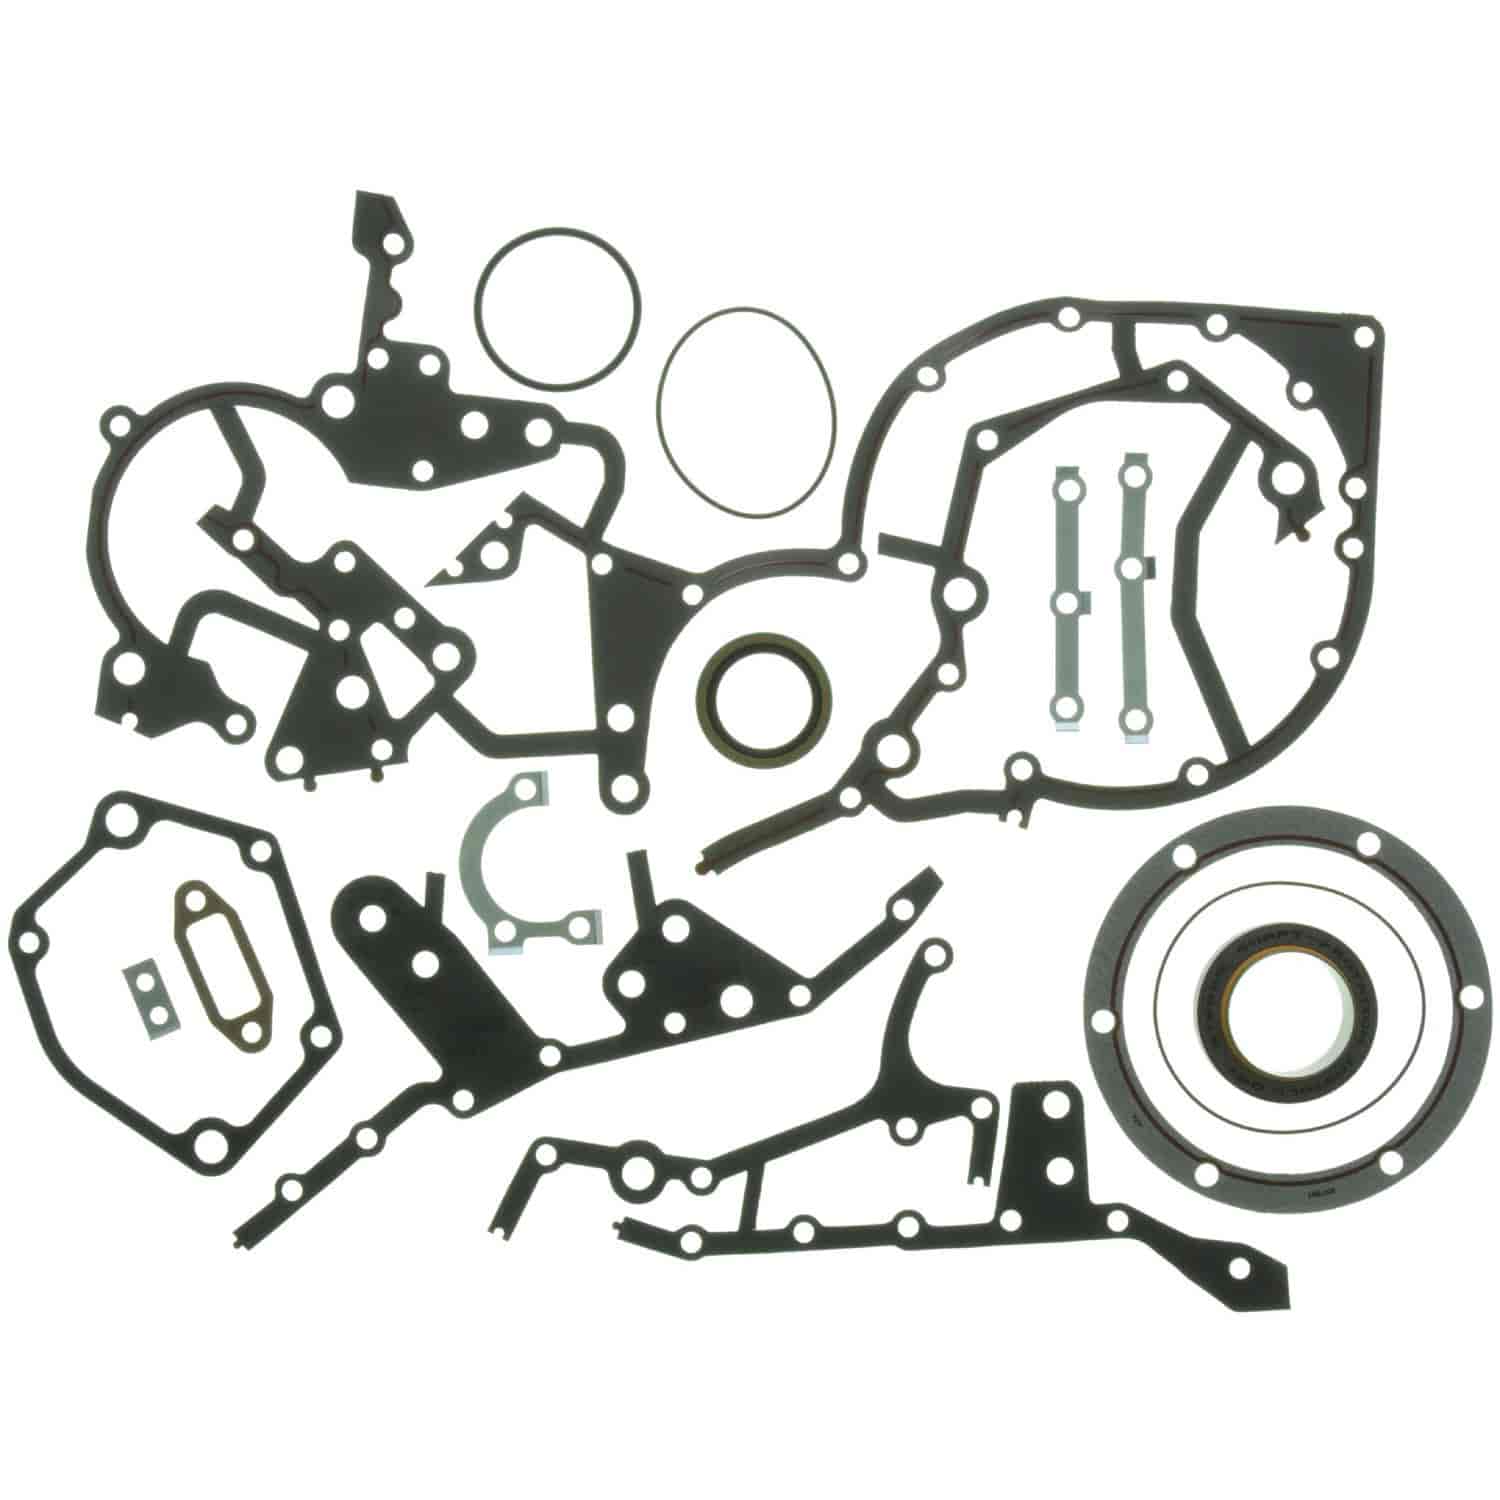 Timing Cover Set Caterpillar 3306 Engines Family